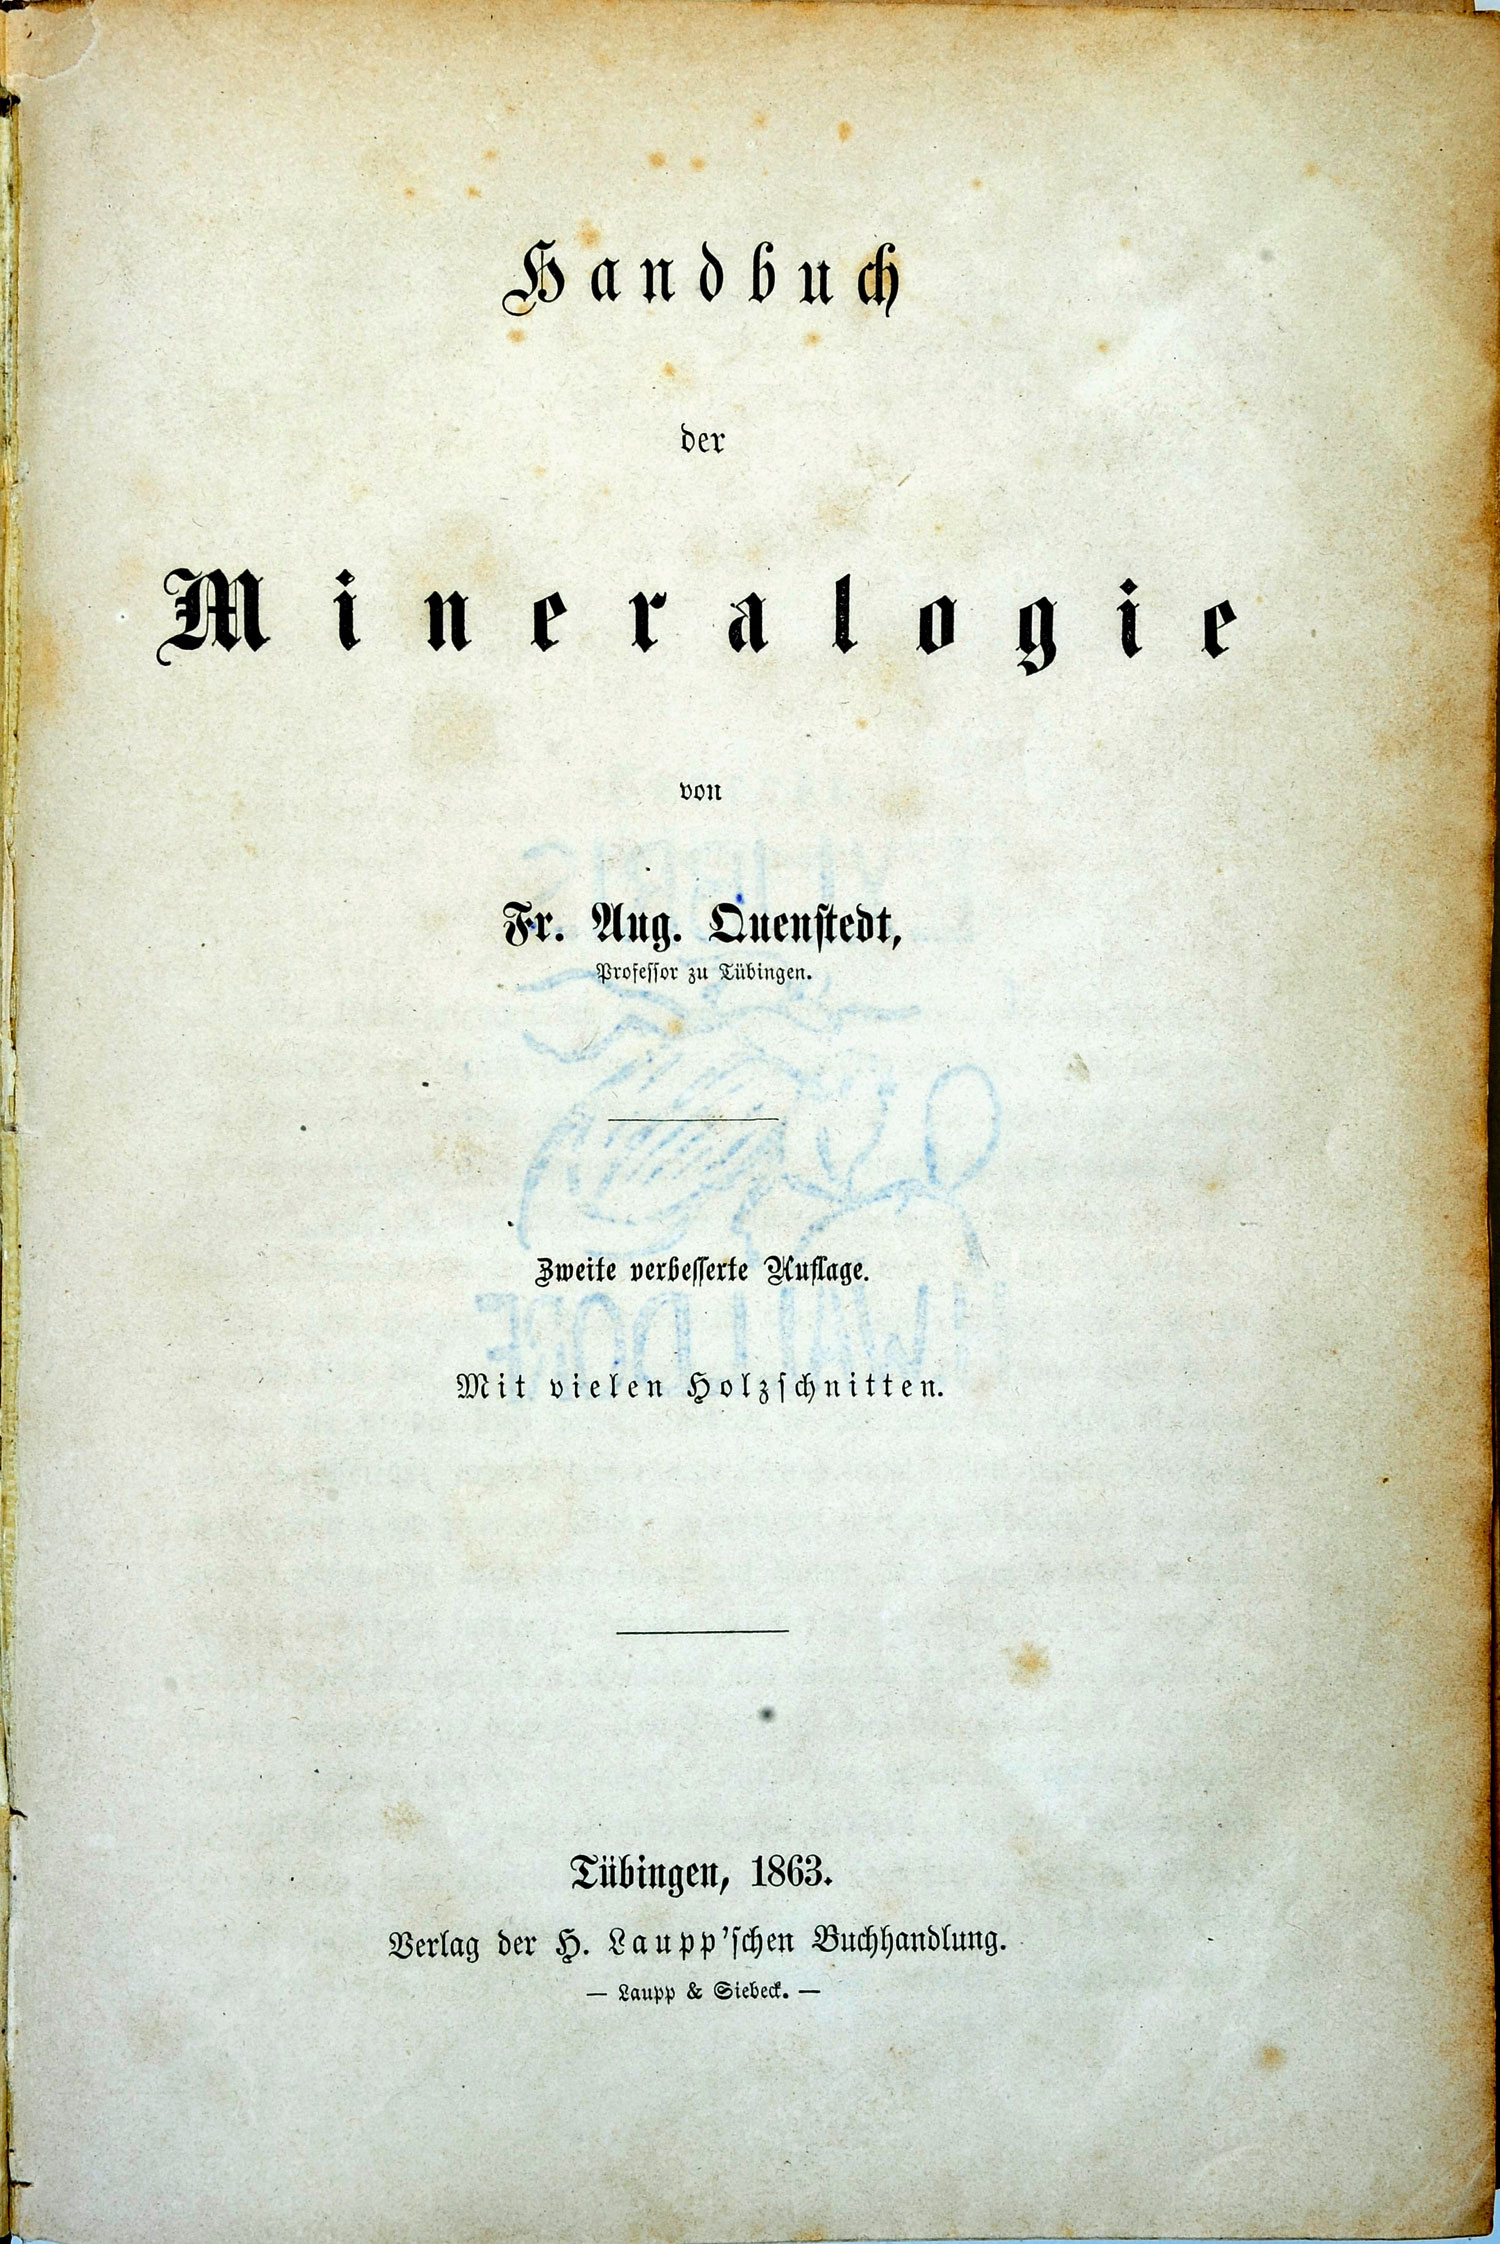 Quenstedt, 1863, title page